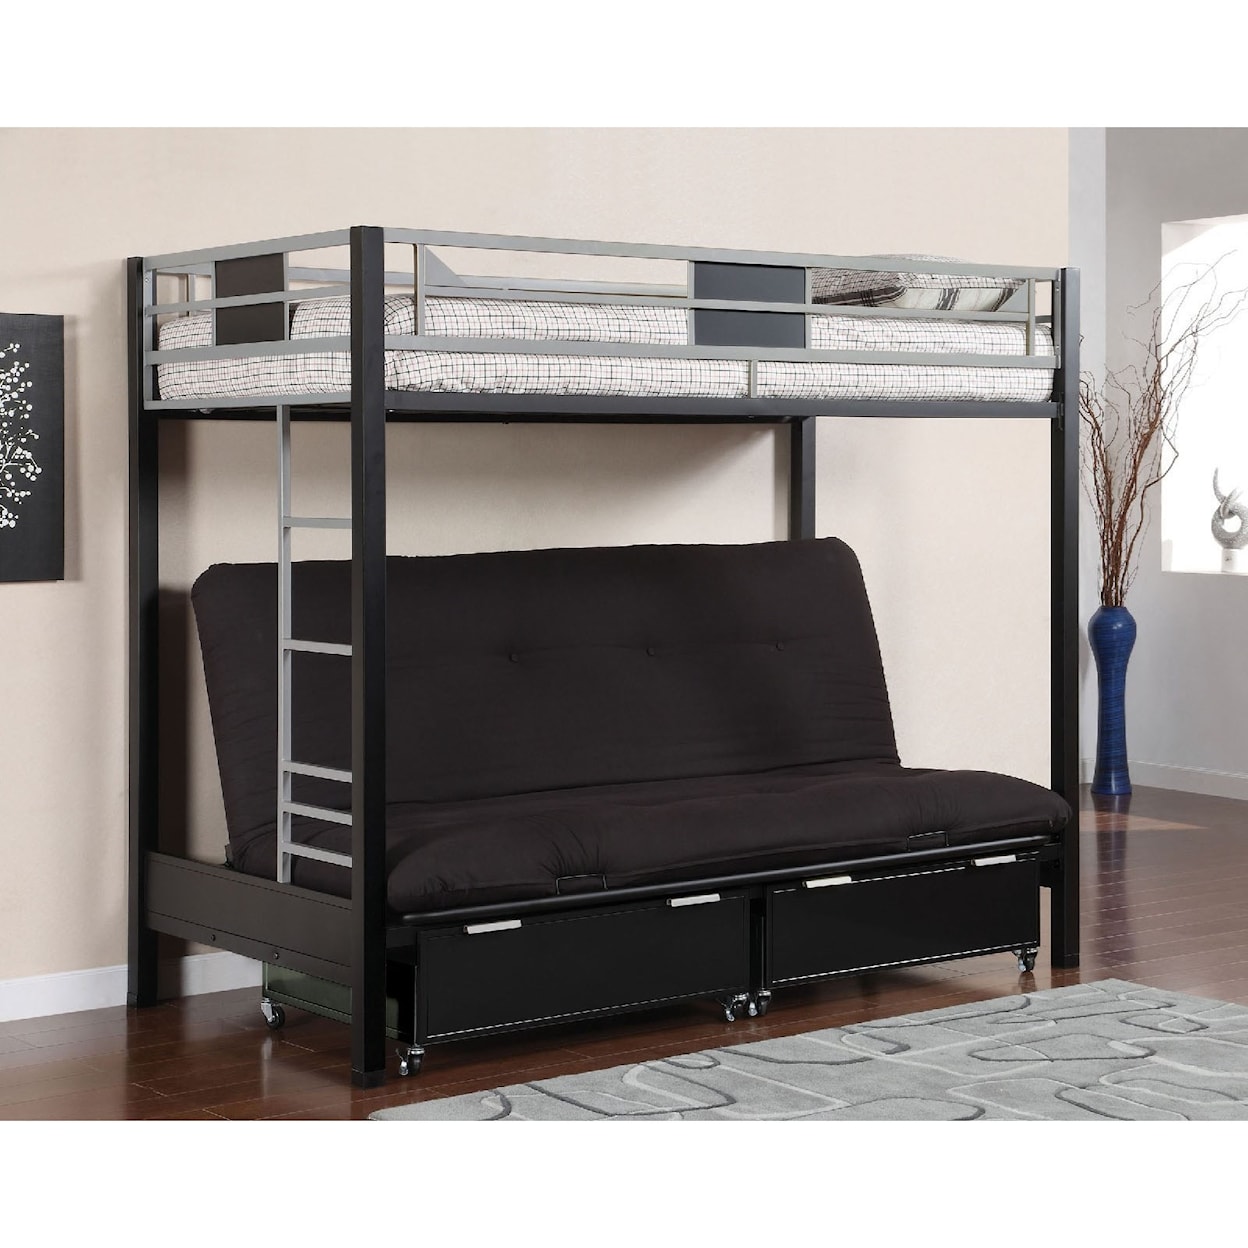 Furniture of America Clifton Twin Loft Bed with Futon Base